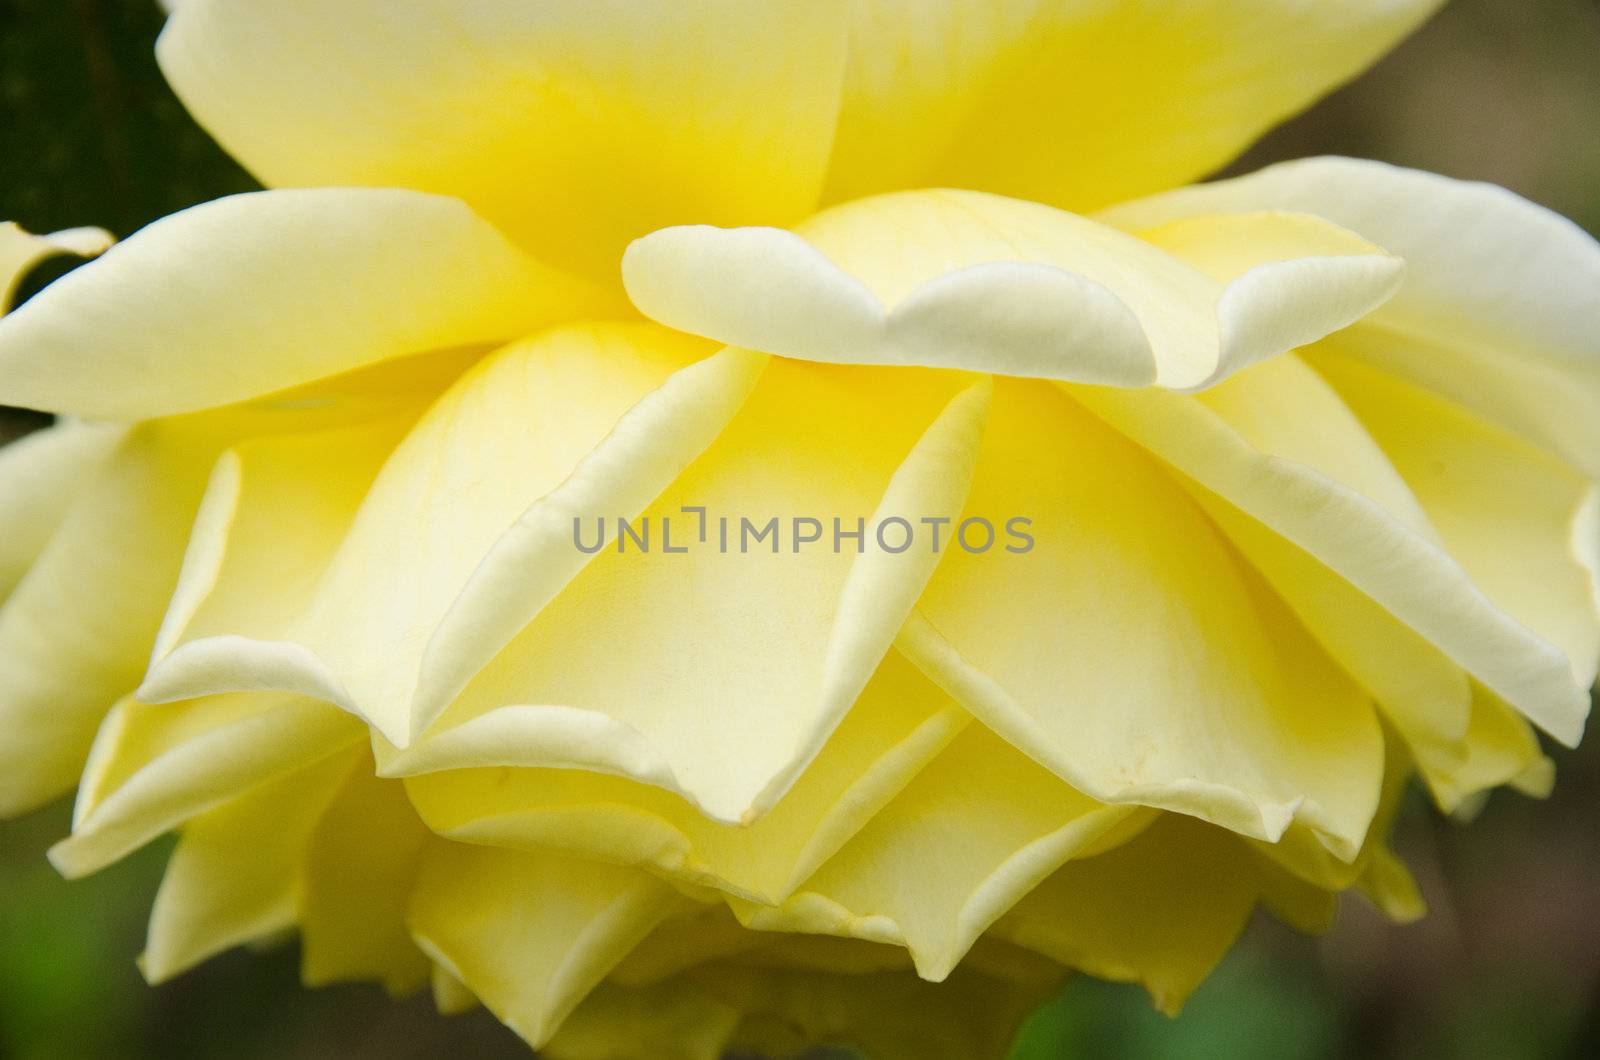 Detail of a yellow rose seen from the side